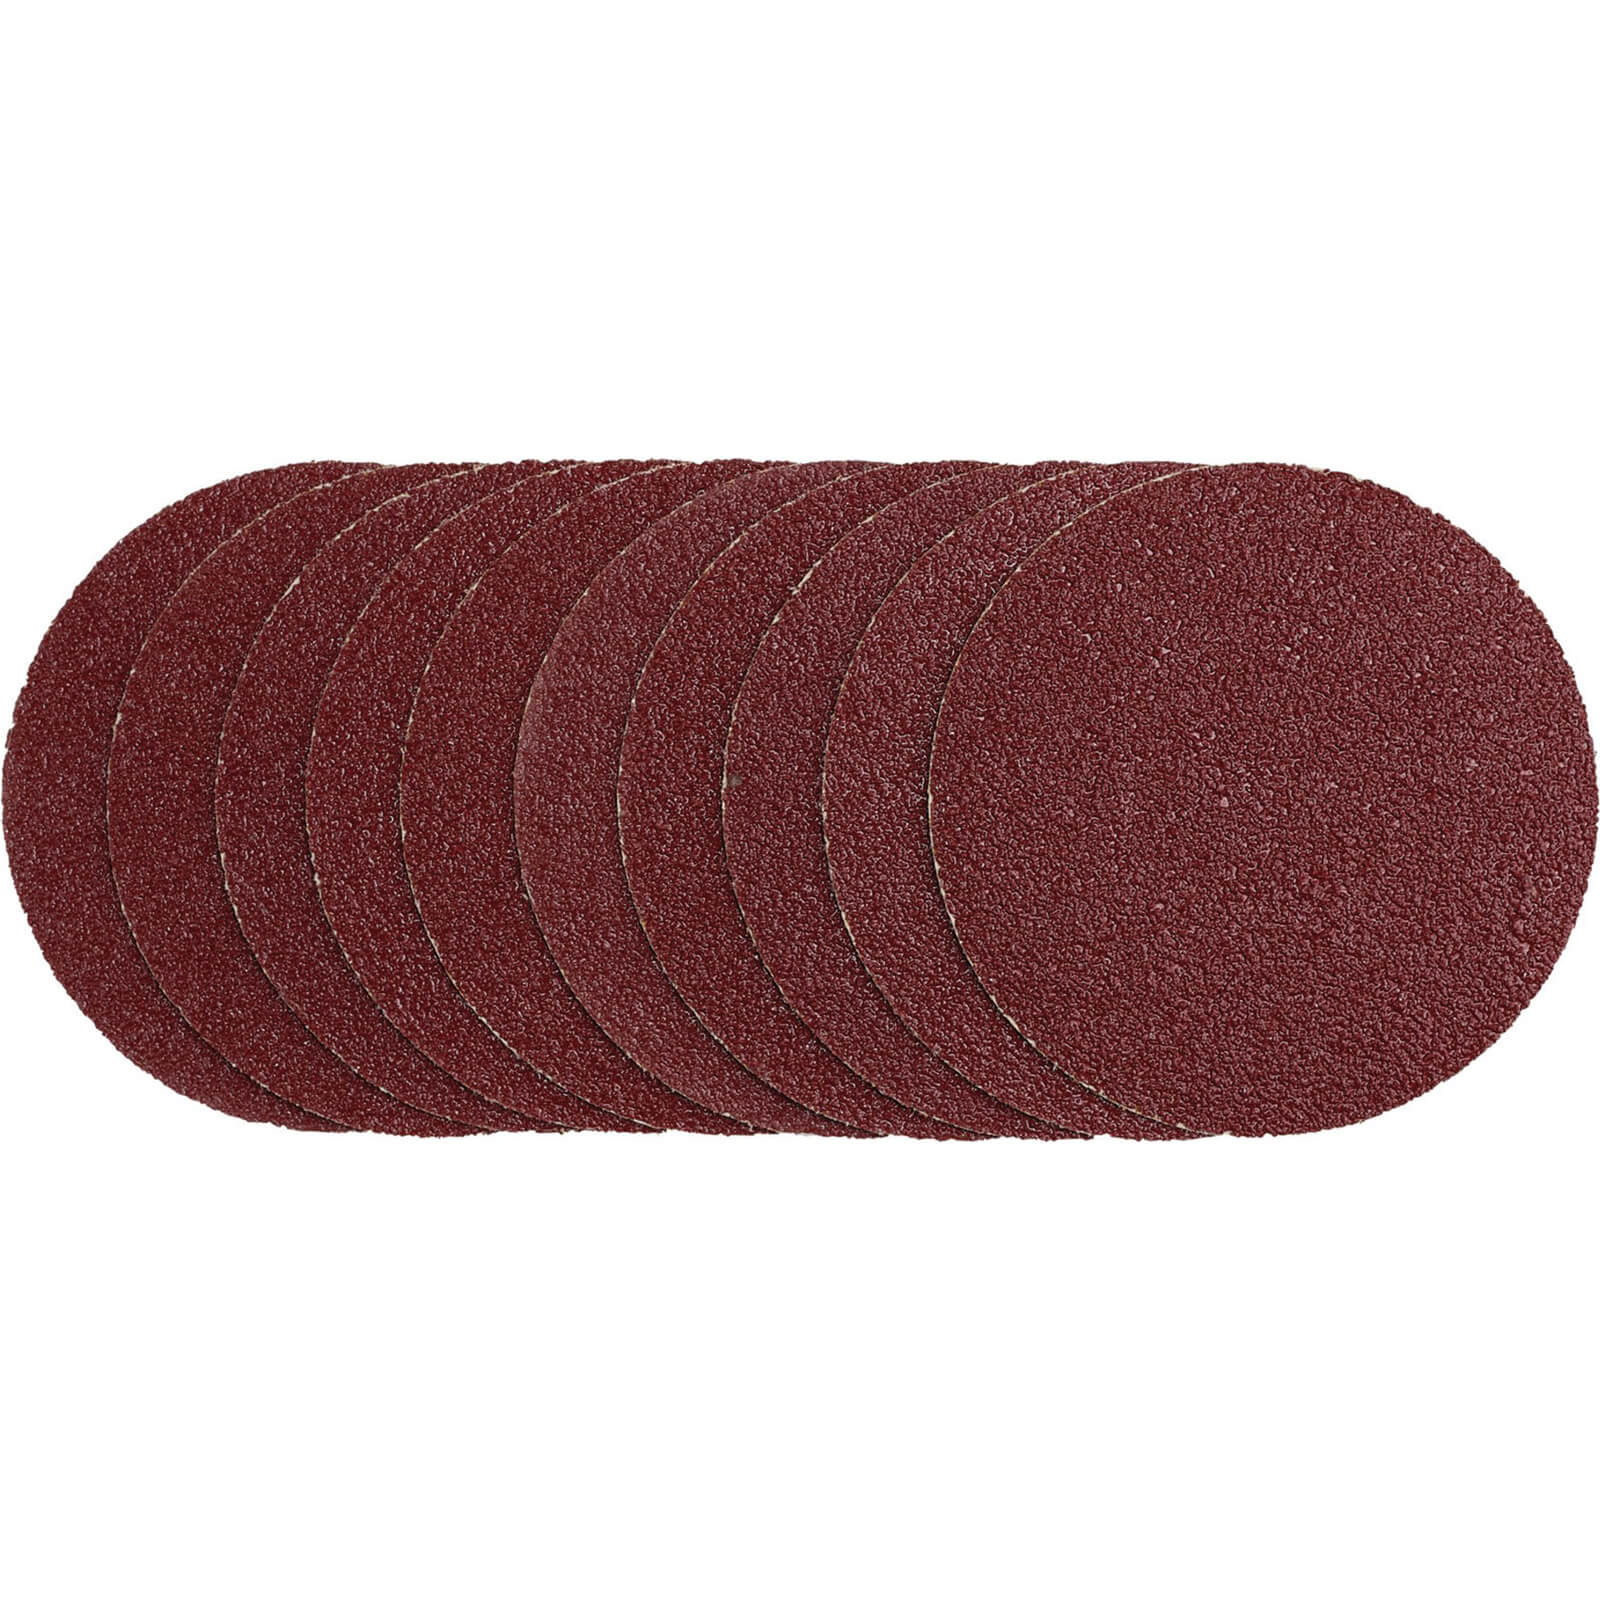 Image of Draper Unpunched Hook and Loop Sanding Discs 125mm 125mm 40g Pack of 10